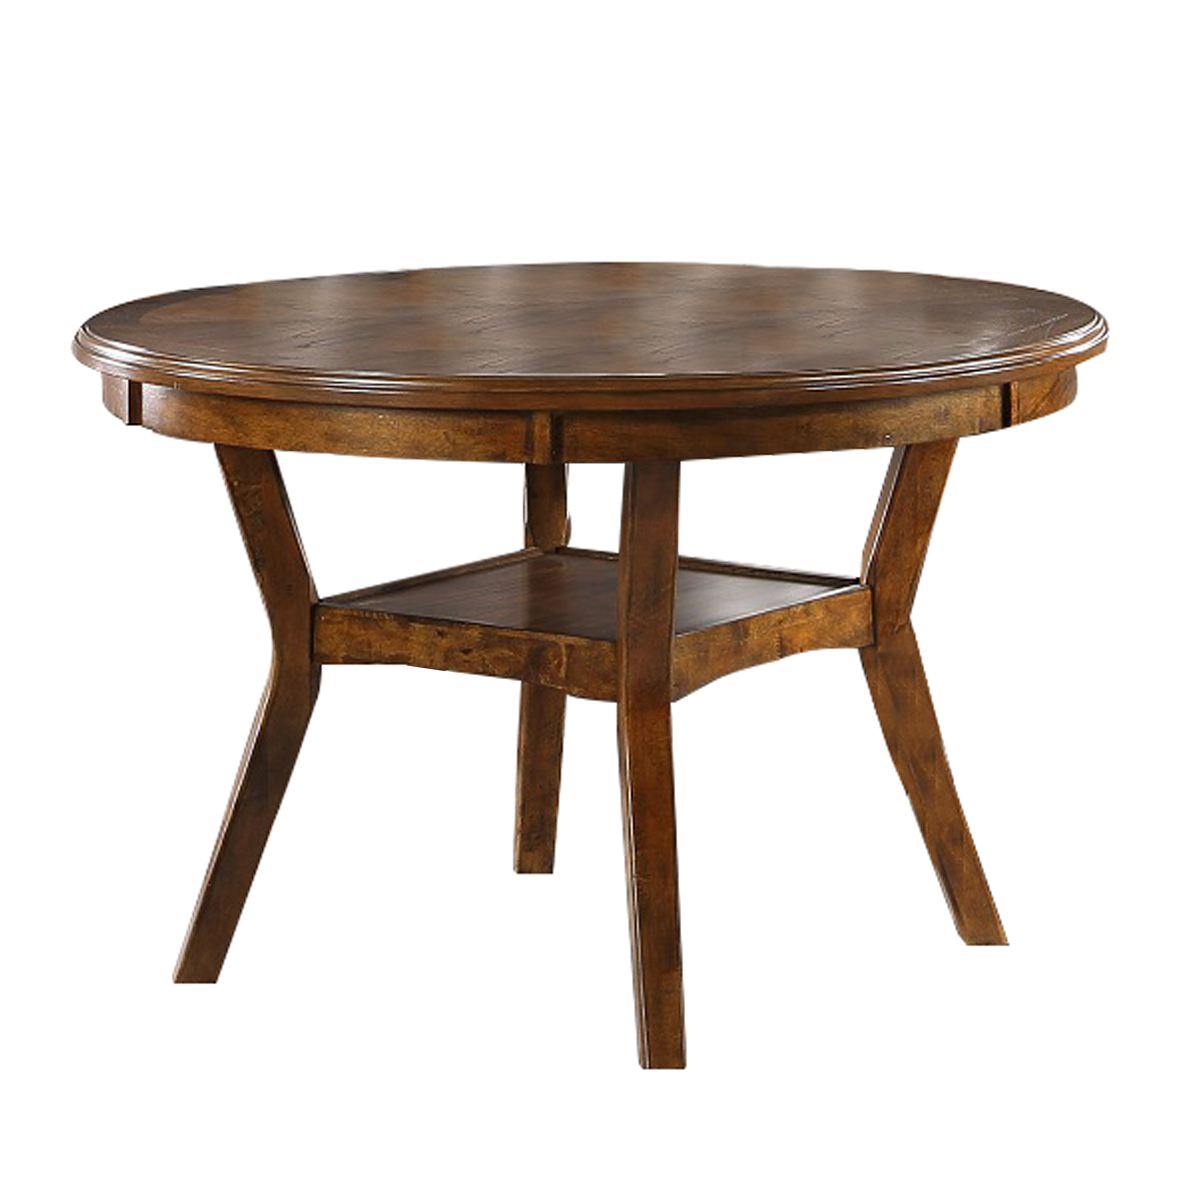 Round Top Wooden Dining Table With Boomerang Legs, Walnut Brown- Saltoro Sherpi